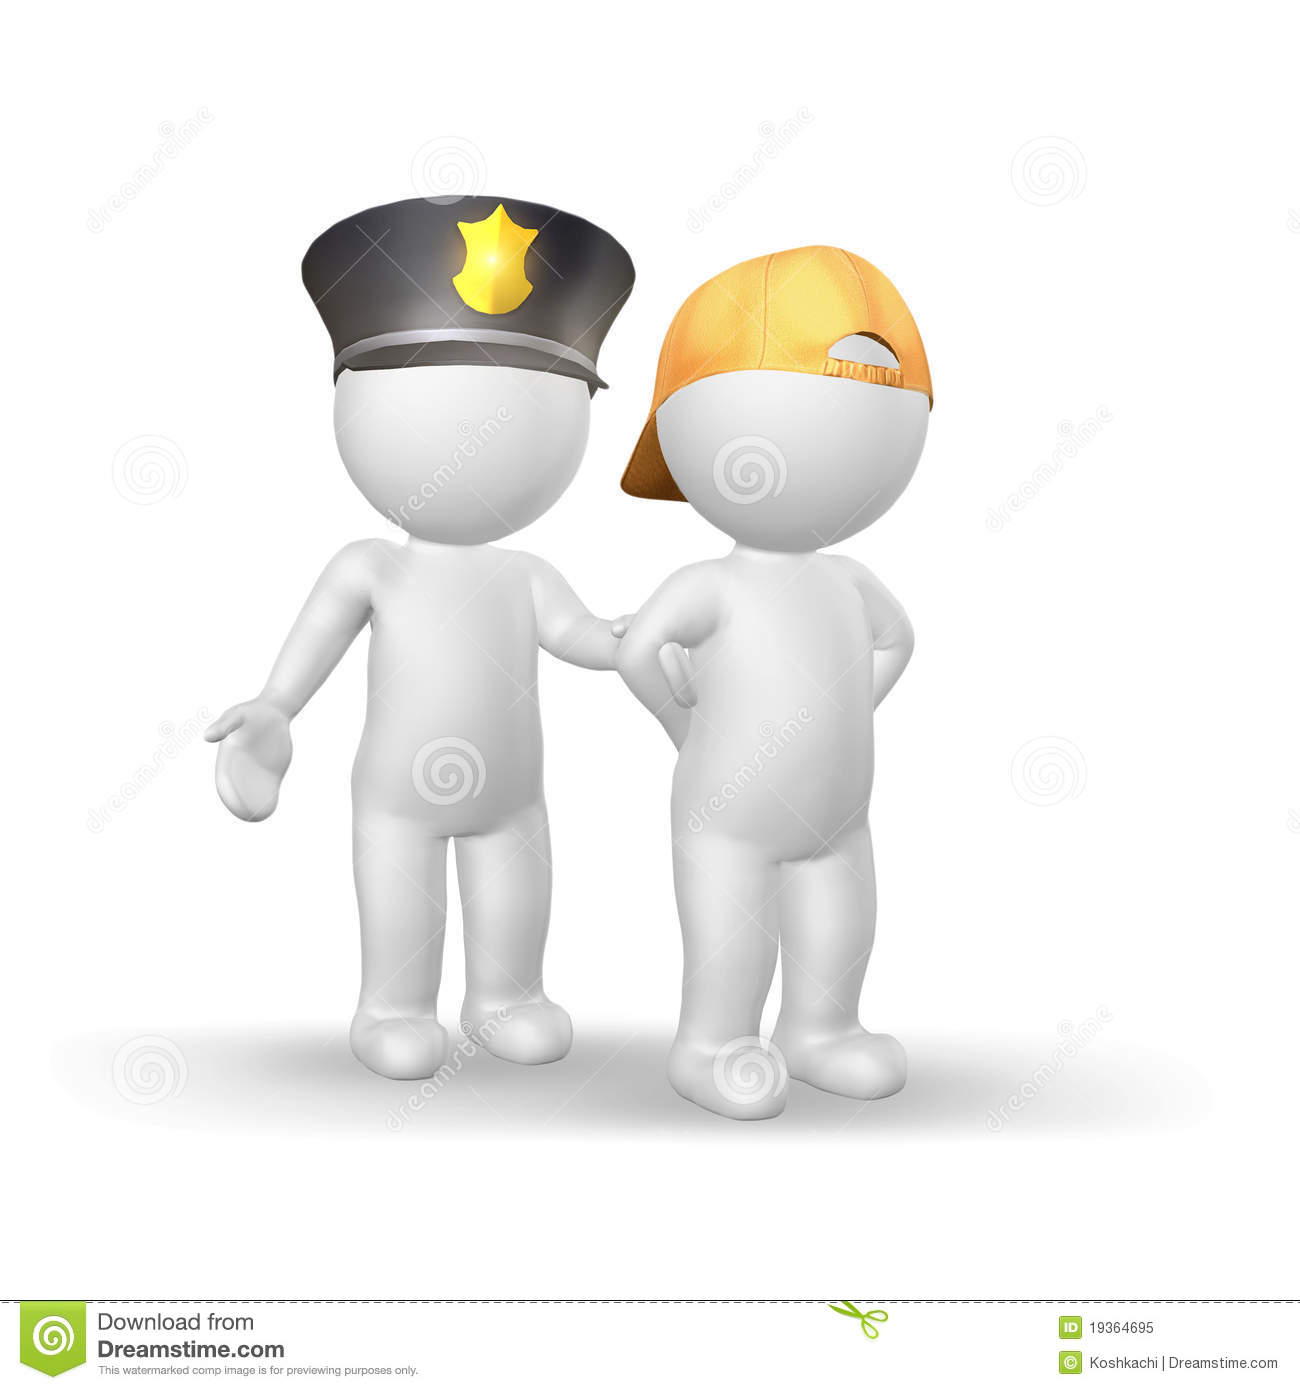 Policeman And Lteenager Isolated On White Background